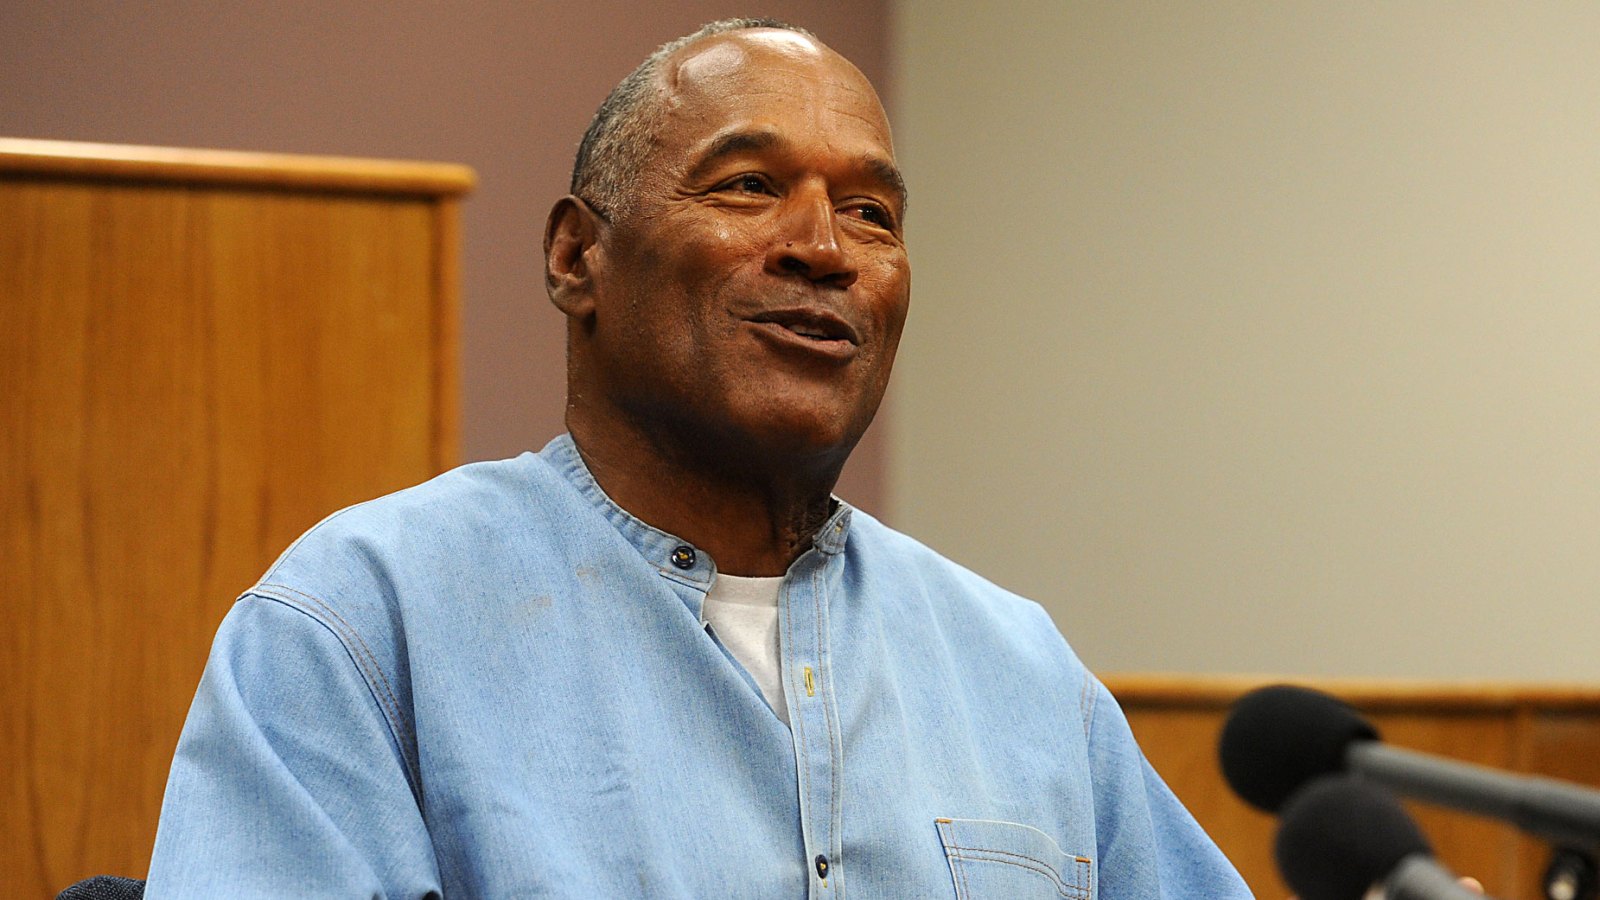 O.J. Simpson Joins Twitter Days After 25th Anniversary of Nicole Brown Simpson, Ron Goldman Murders